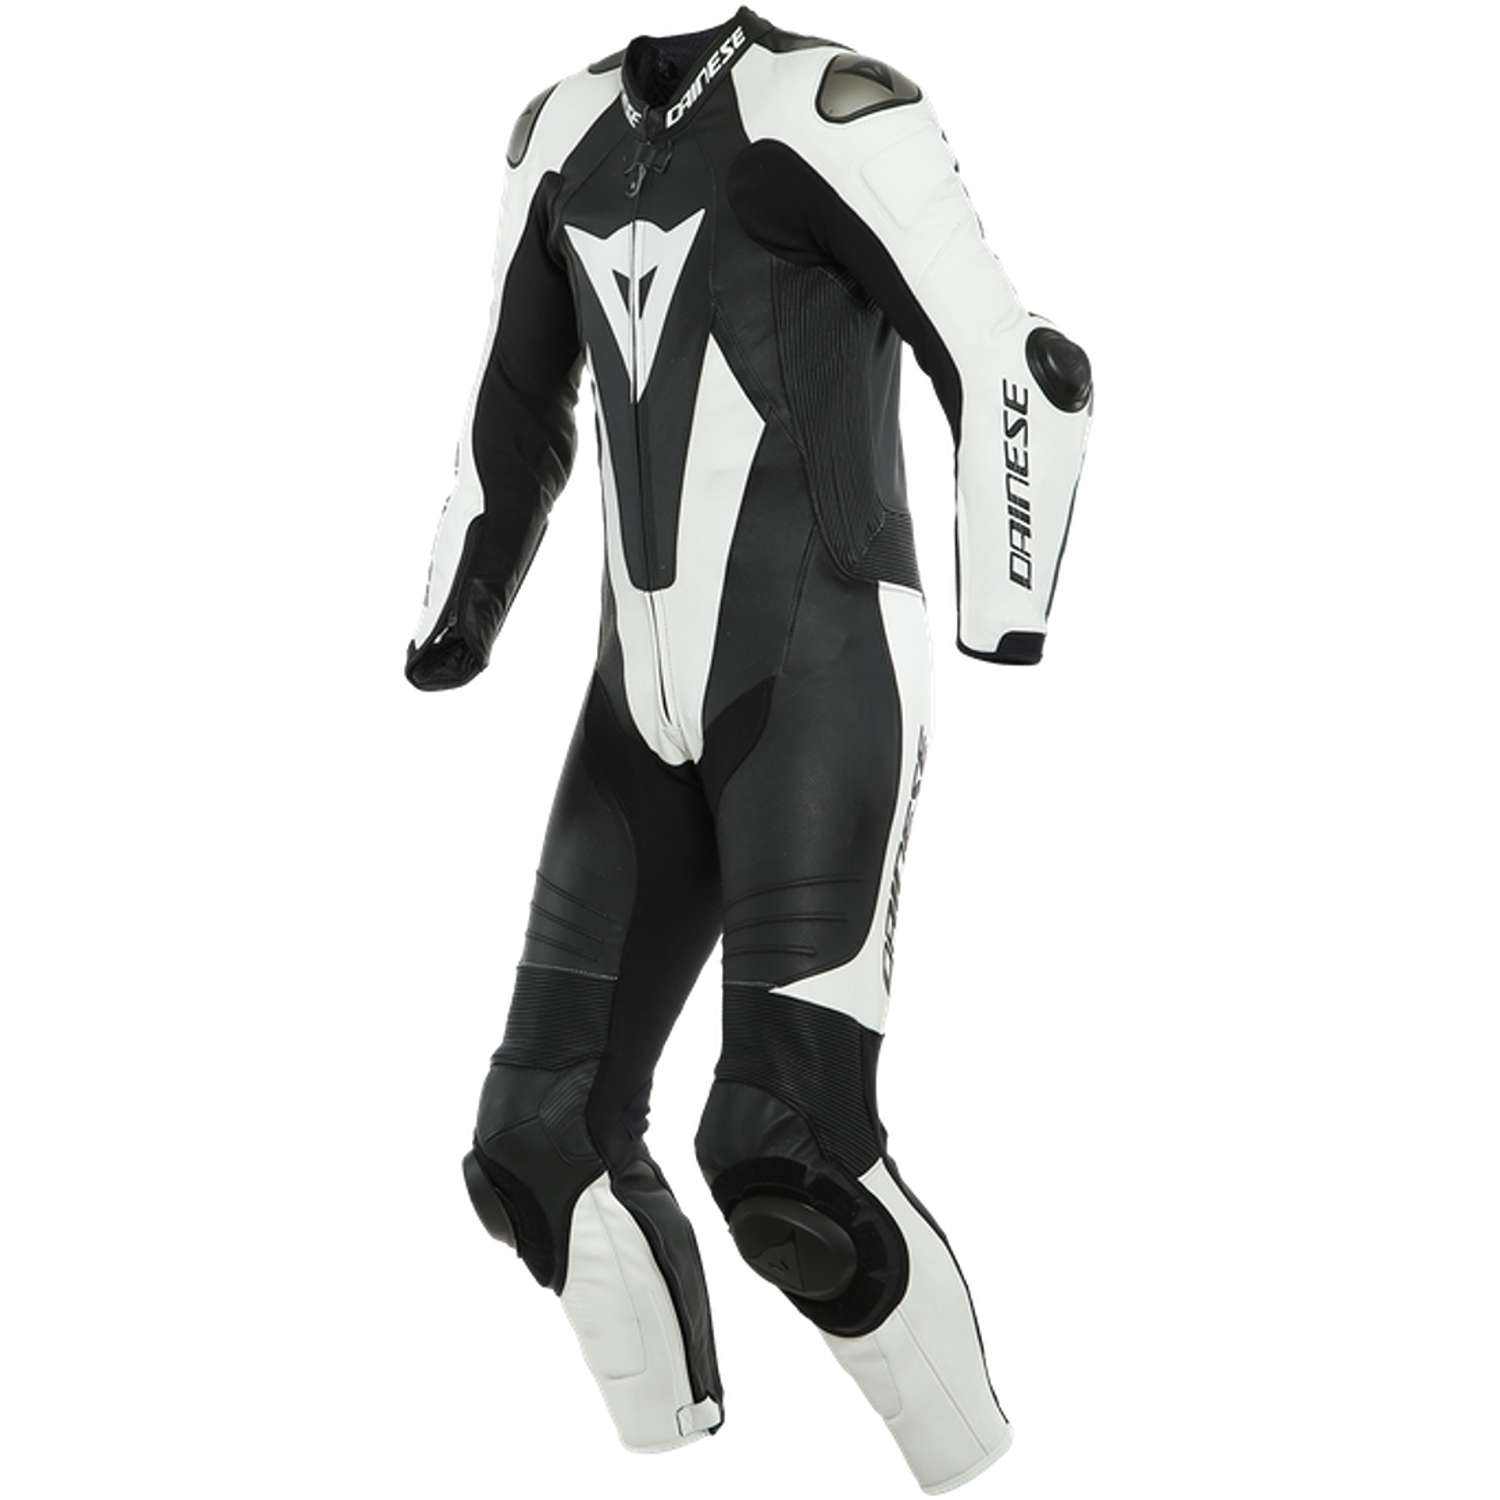 Image of Dainese Laguna Seca 5 1Pc Leather Suit Perf S/T Black White Size 116 ID 8051019257932